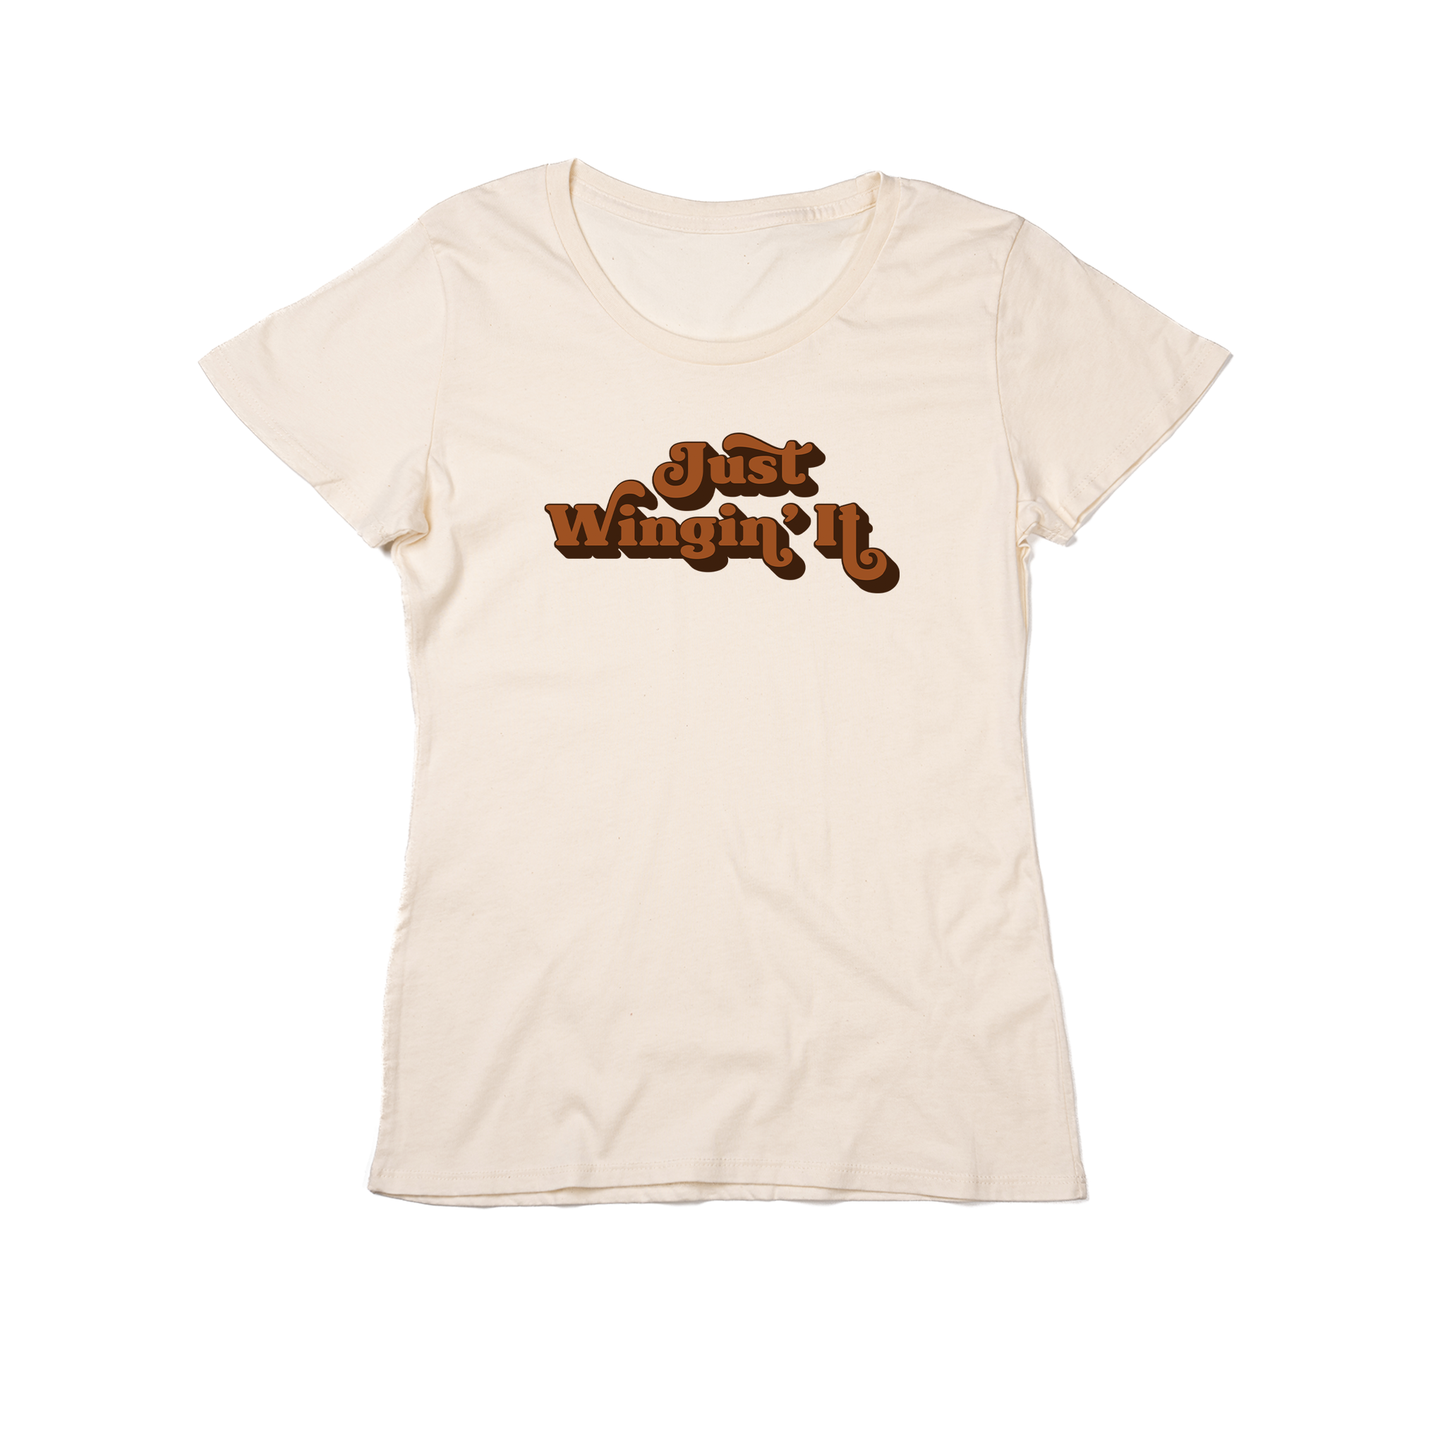 Just Wingin' It (Vintage, Across Front) - Women's Fitted Tee (Natural)